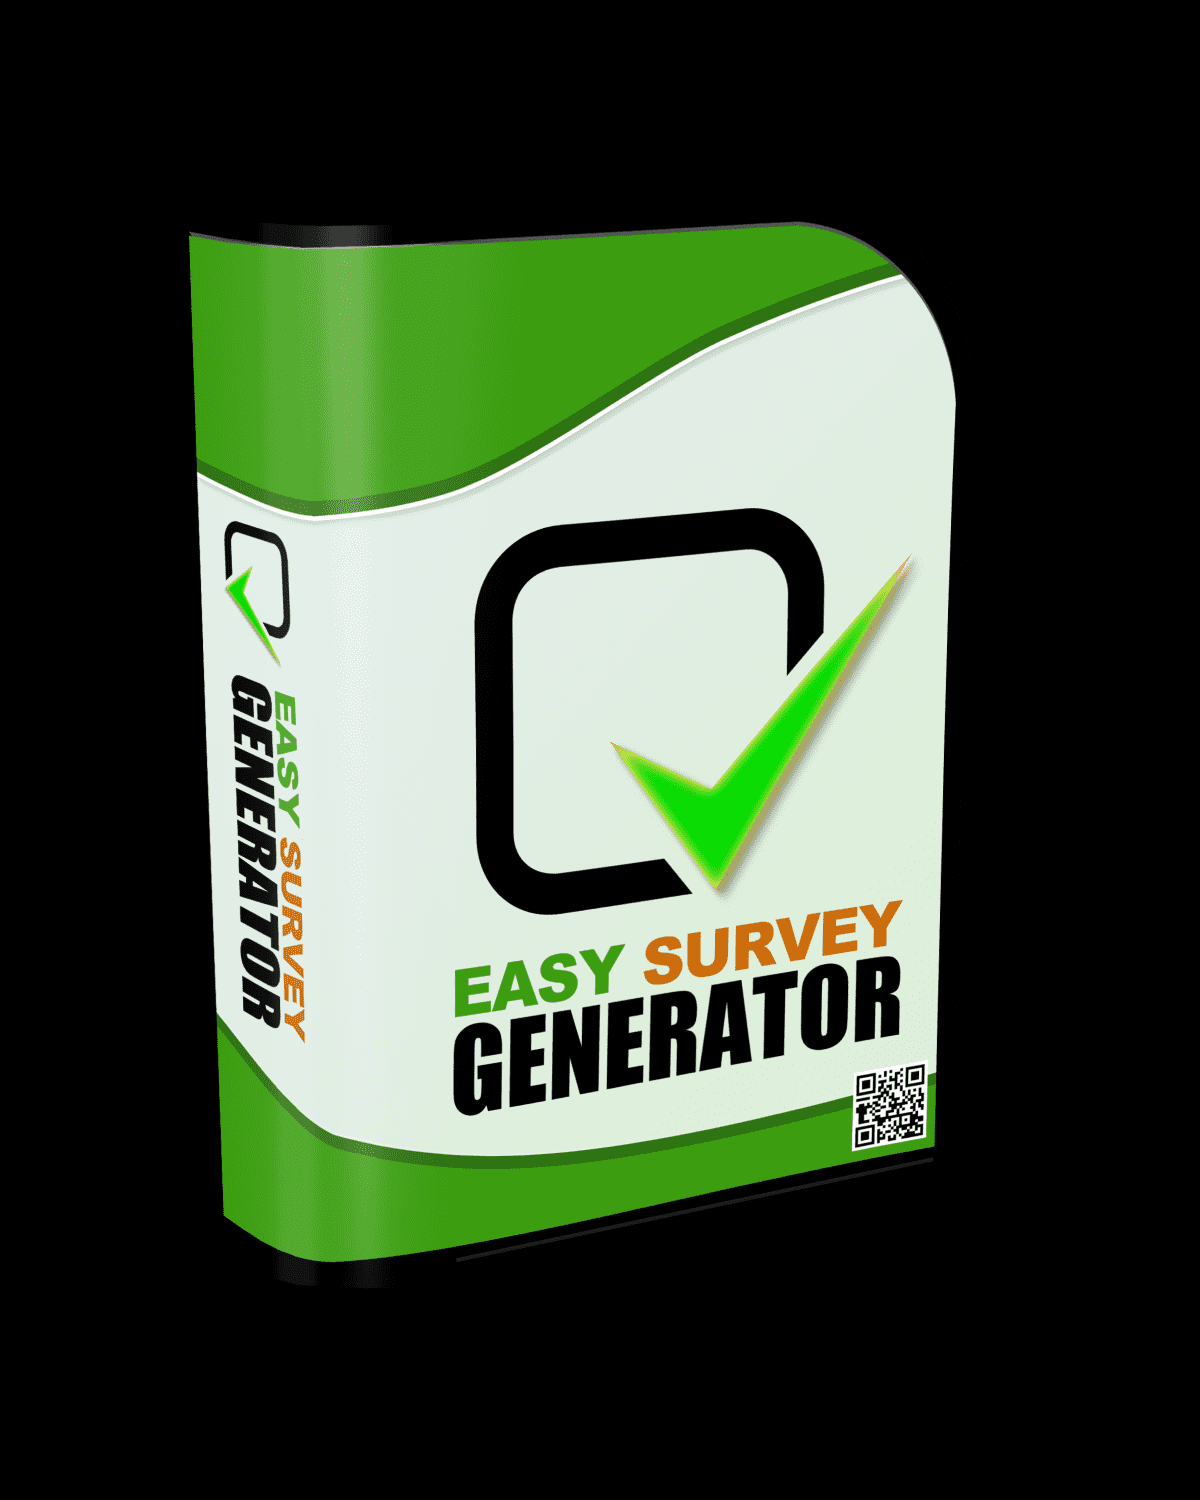 Easy Survey Generator - Instant Download Software - Reseller Rights